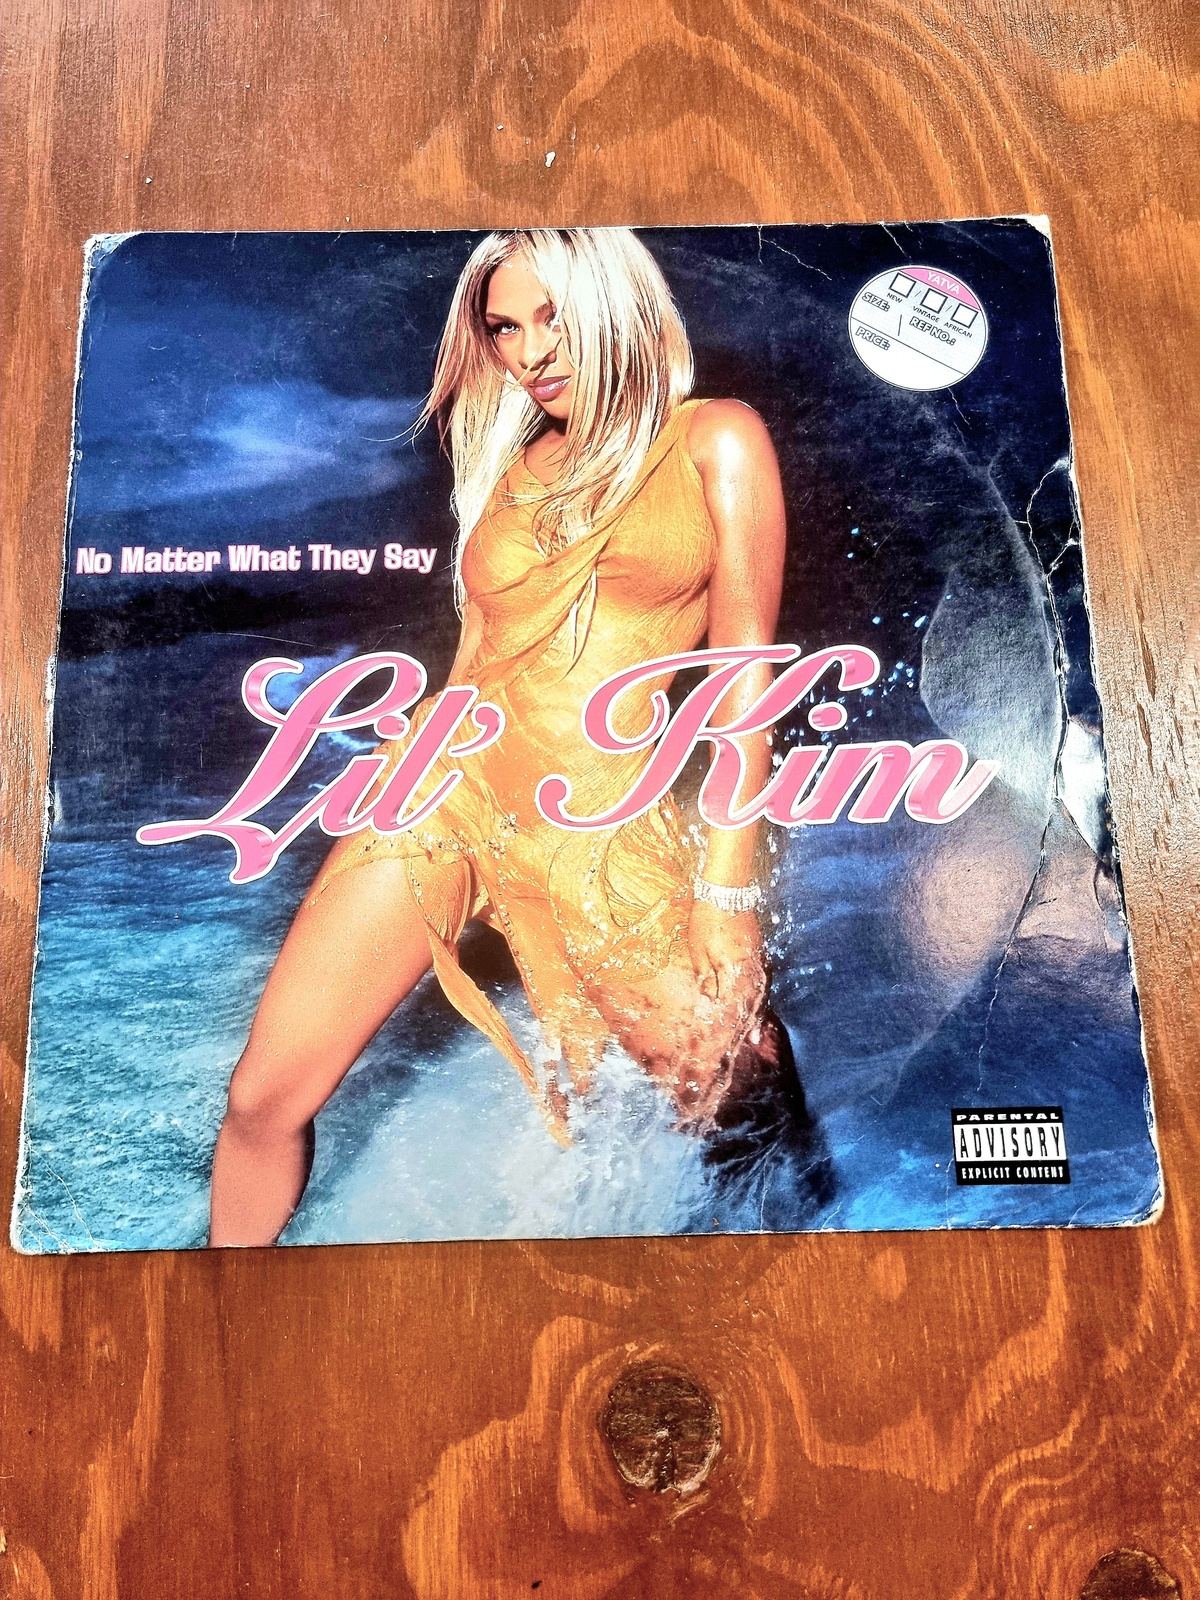 Lil' Kim - No matter what they say